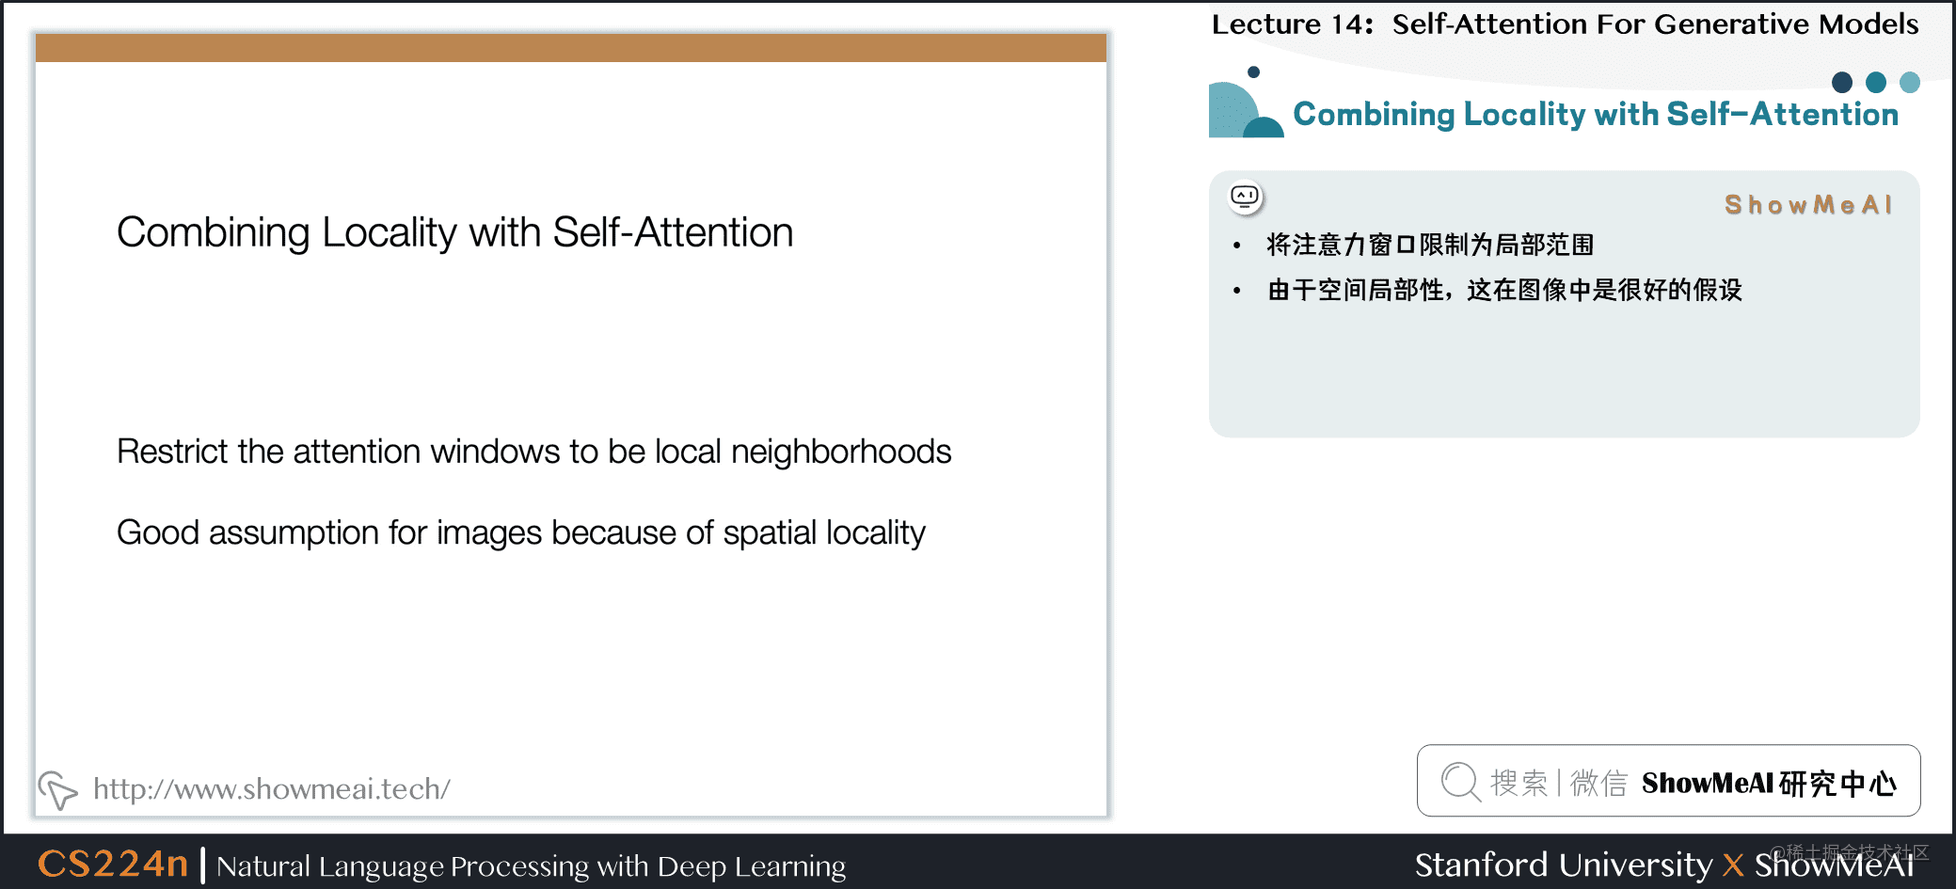 Combining Locality with Self-Attention